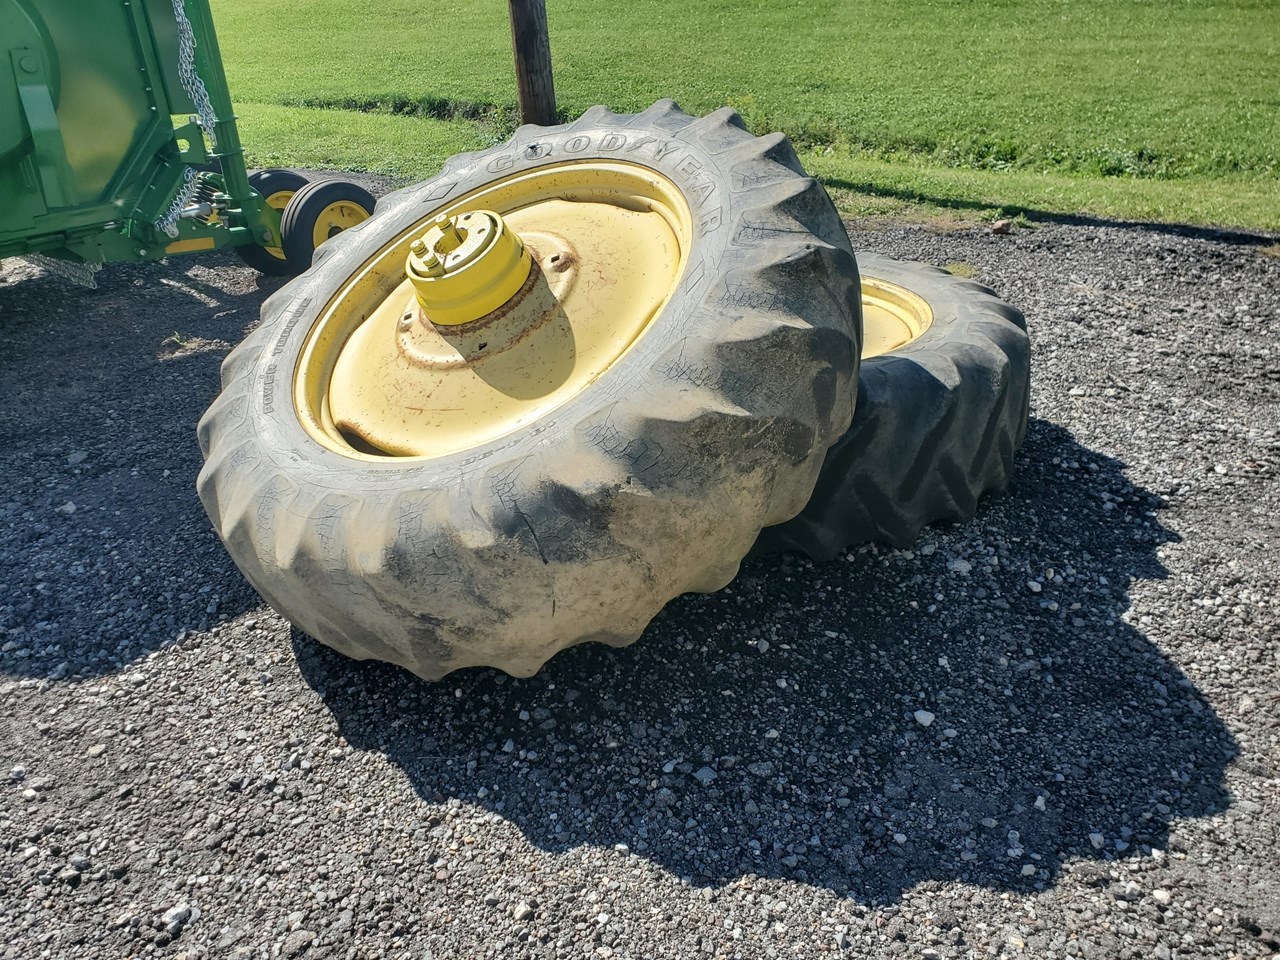 1980 John Deere DUALS Tires and Tracks For Sale